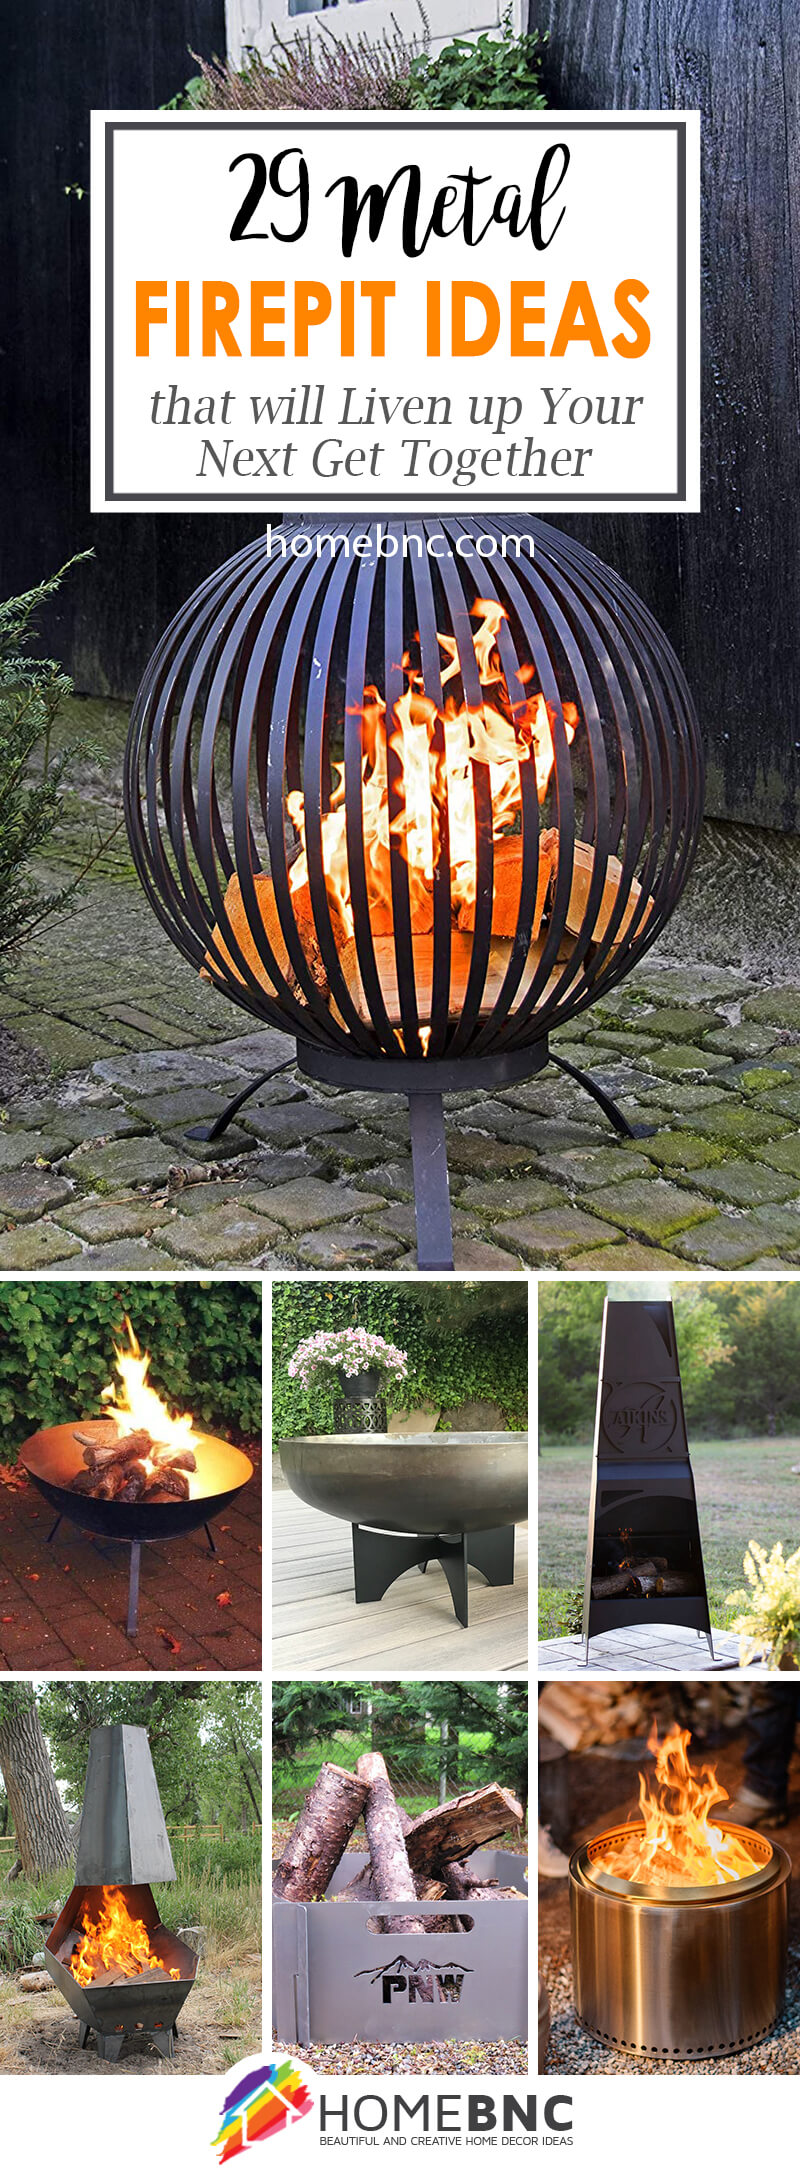 29 Best Metal Fire Pit Ideas To, Fire Pit Chimney Design